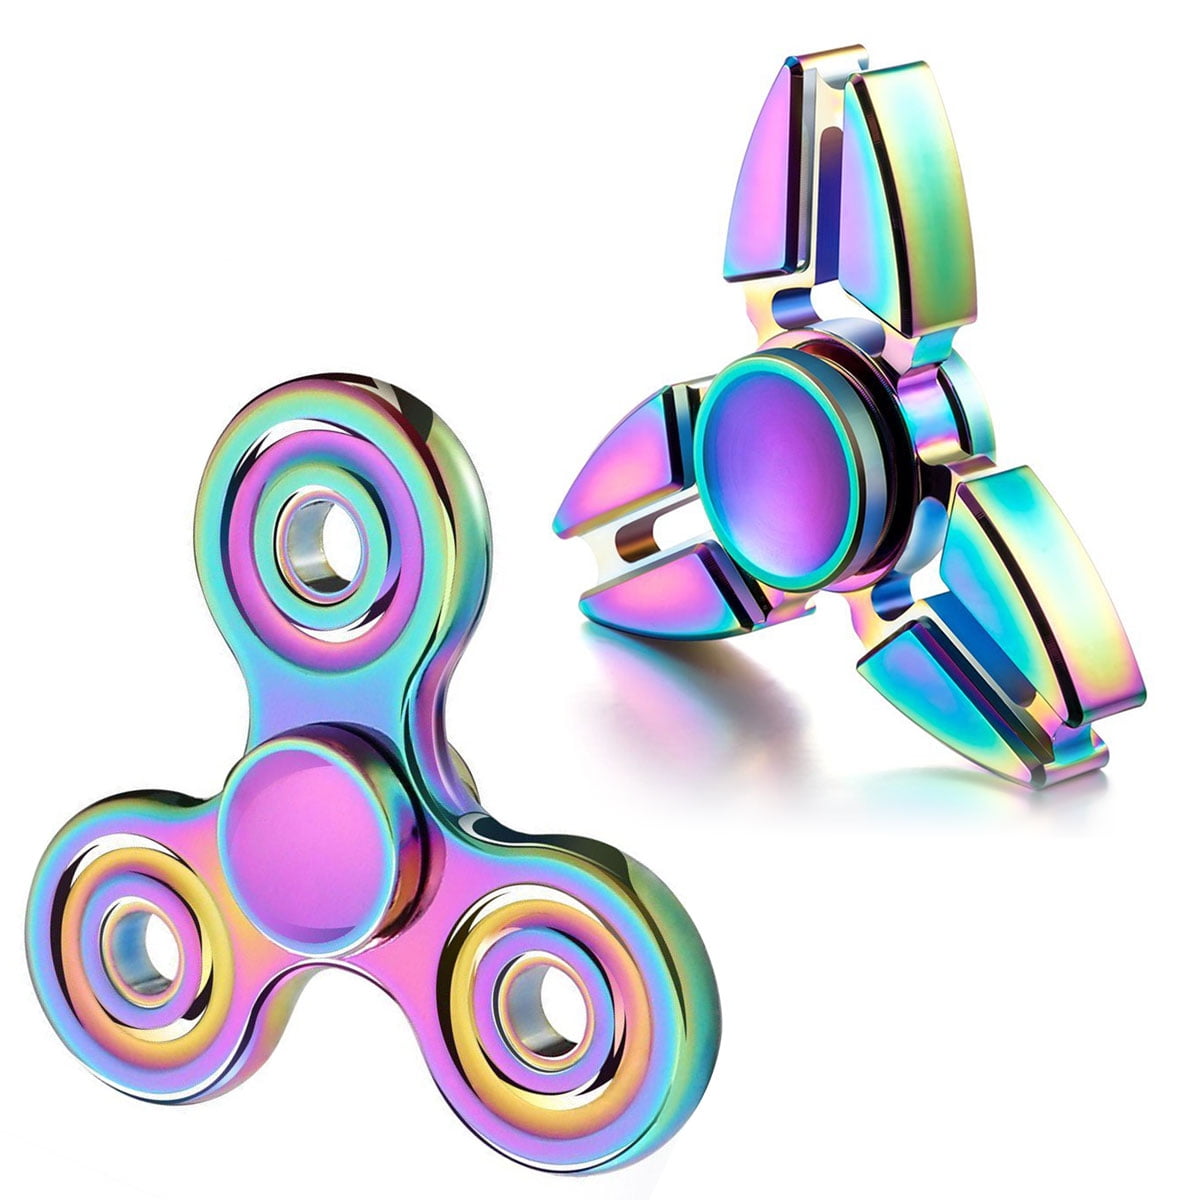 EDC Whirlwind Fidget Hand Spinner Multicolor Rainbow Focus ADHD Finger Toy 